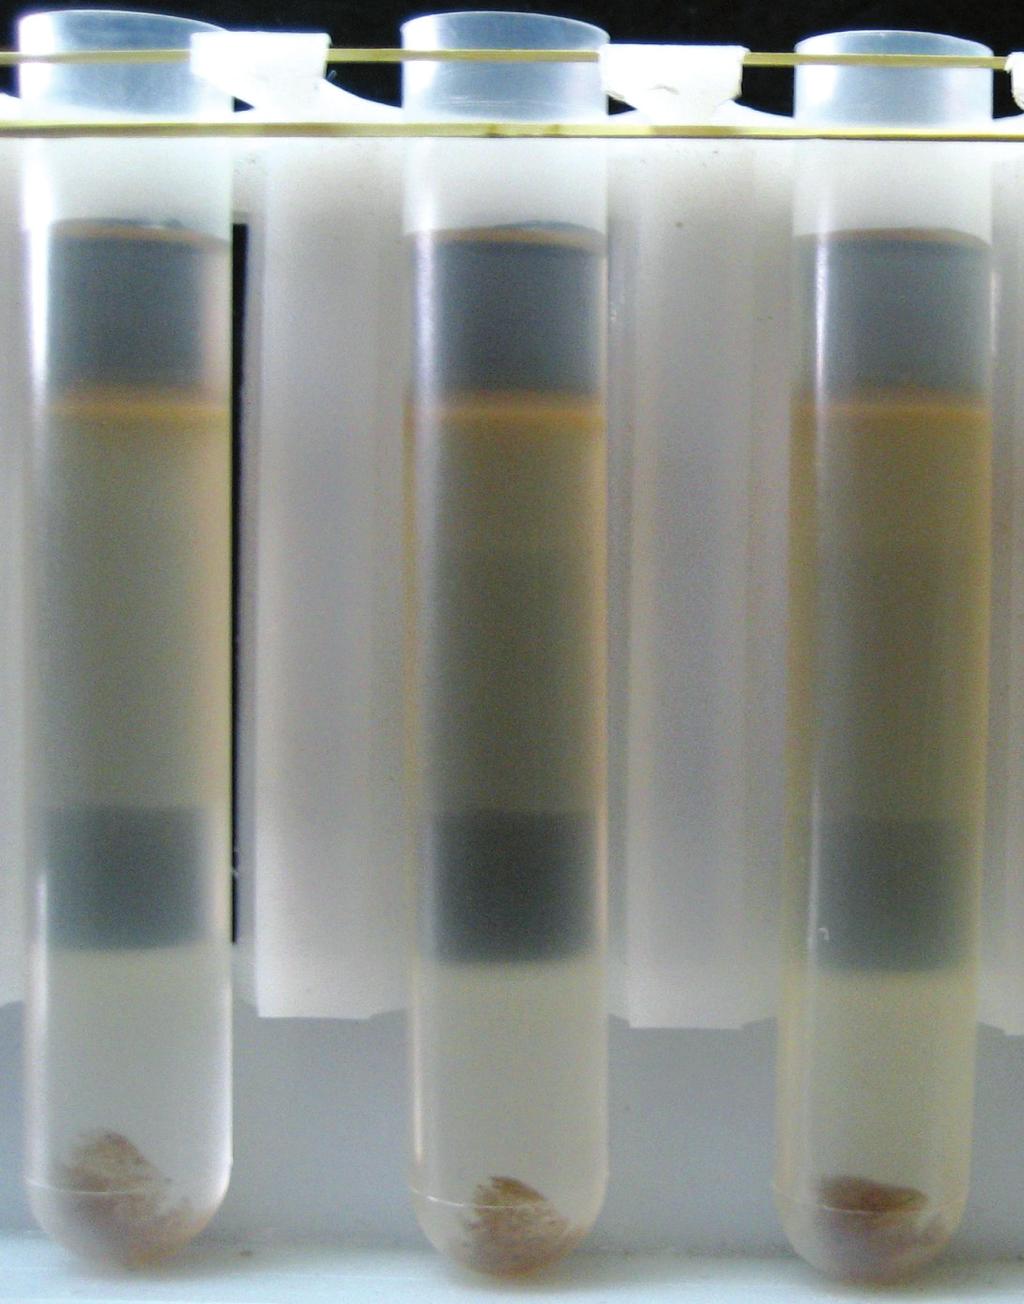 From top to bottom can be identified: a sucrose band, a soft dirty ring, a baculovirus band and a sucrose plus buffer band. Gross dirt precipitate can be observed at the bottom of the tubes.